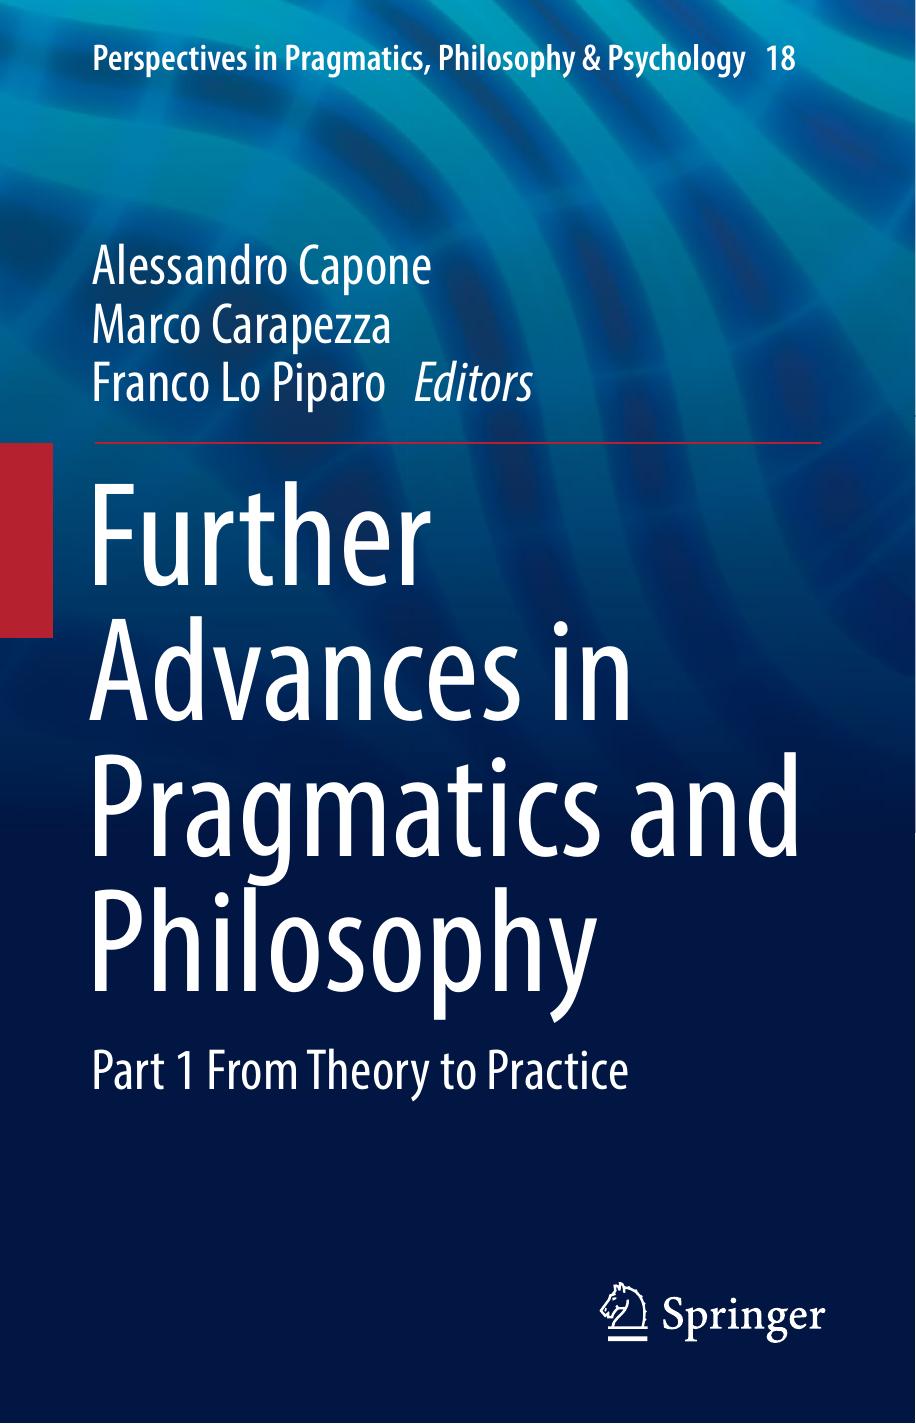 Further Advances in Pragmatics and Philosophy: Part 1 From Theory to Practice